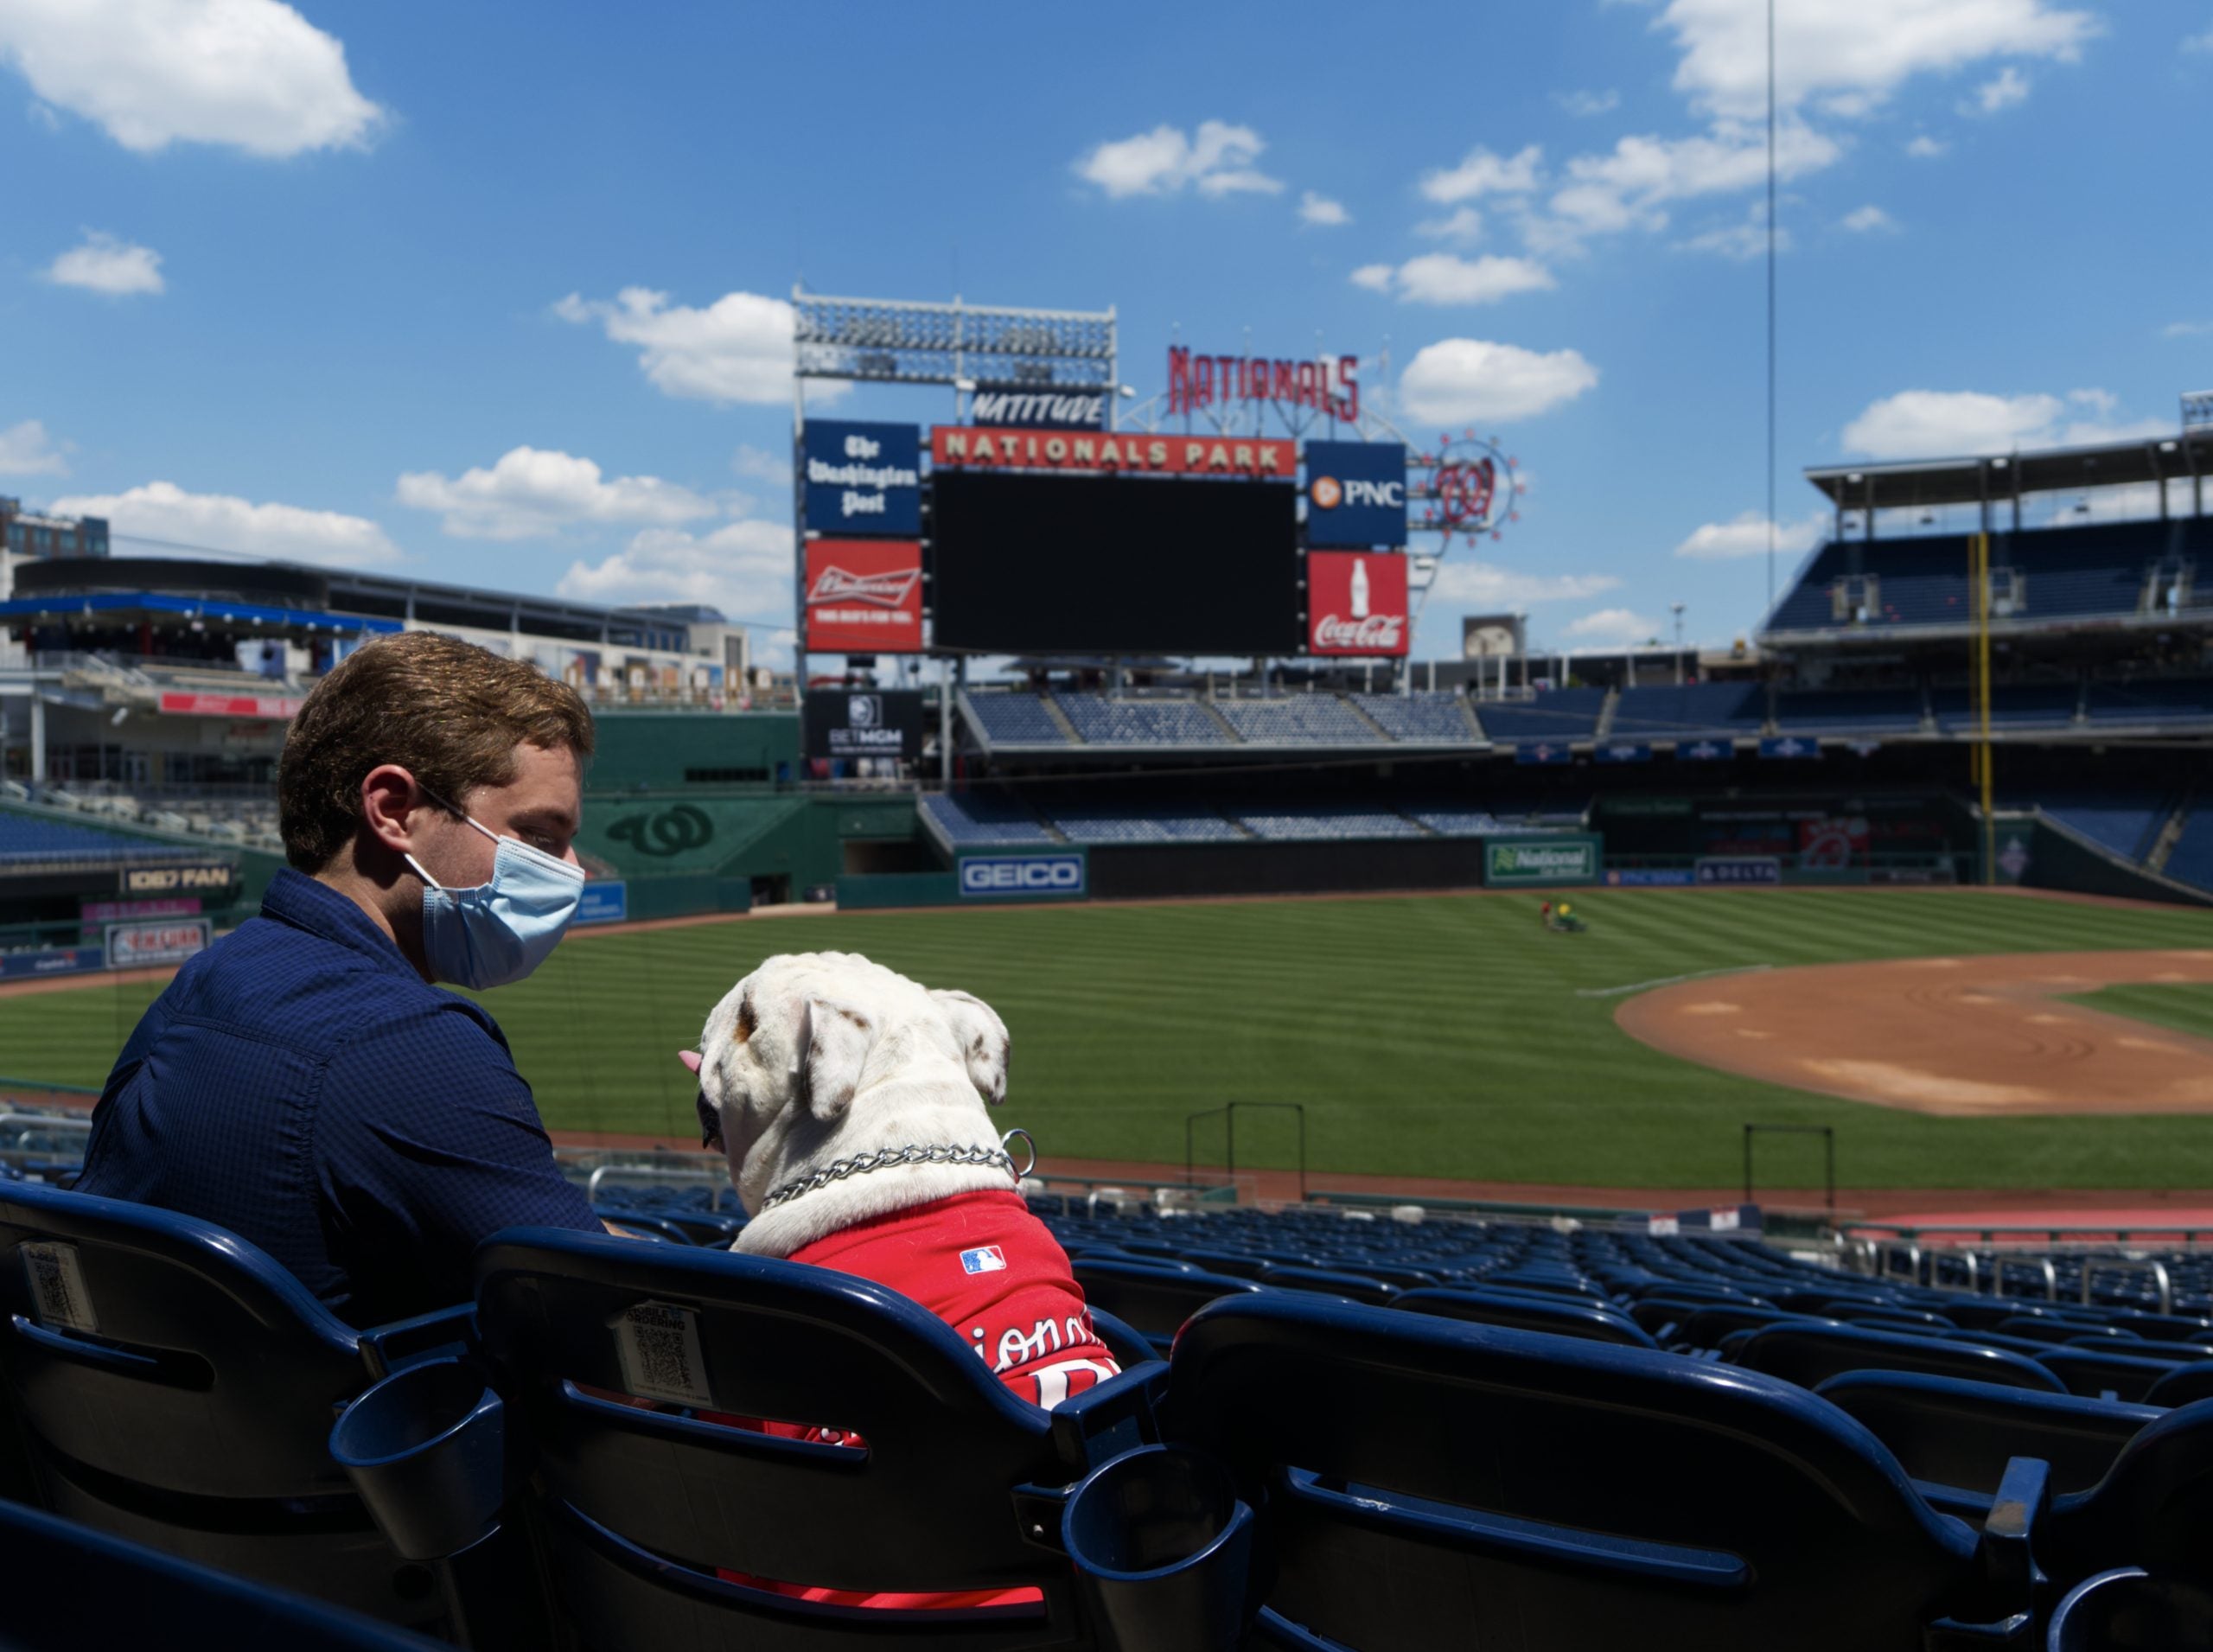 Kirk and Jack the Bulldog alone in the audience of a professional baseball stadium